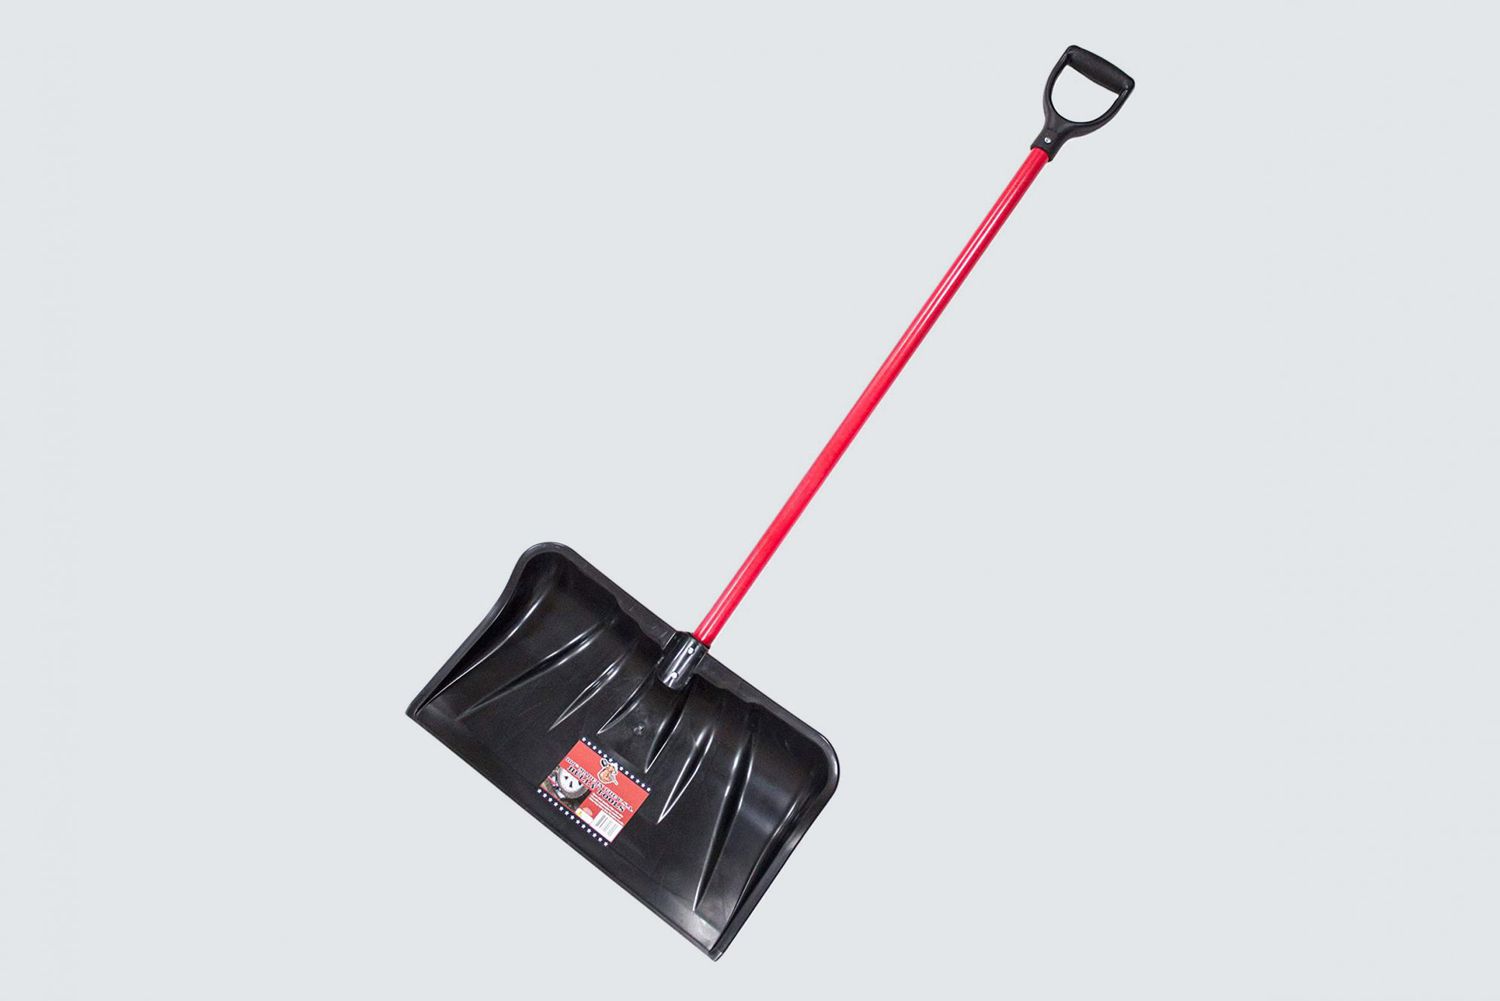 Bully Tools 92814 Combination Snow Shovel with Fiberglass D-Grip Handle, 22-Inch